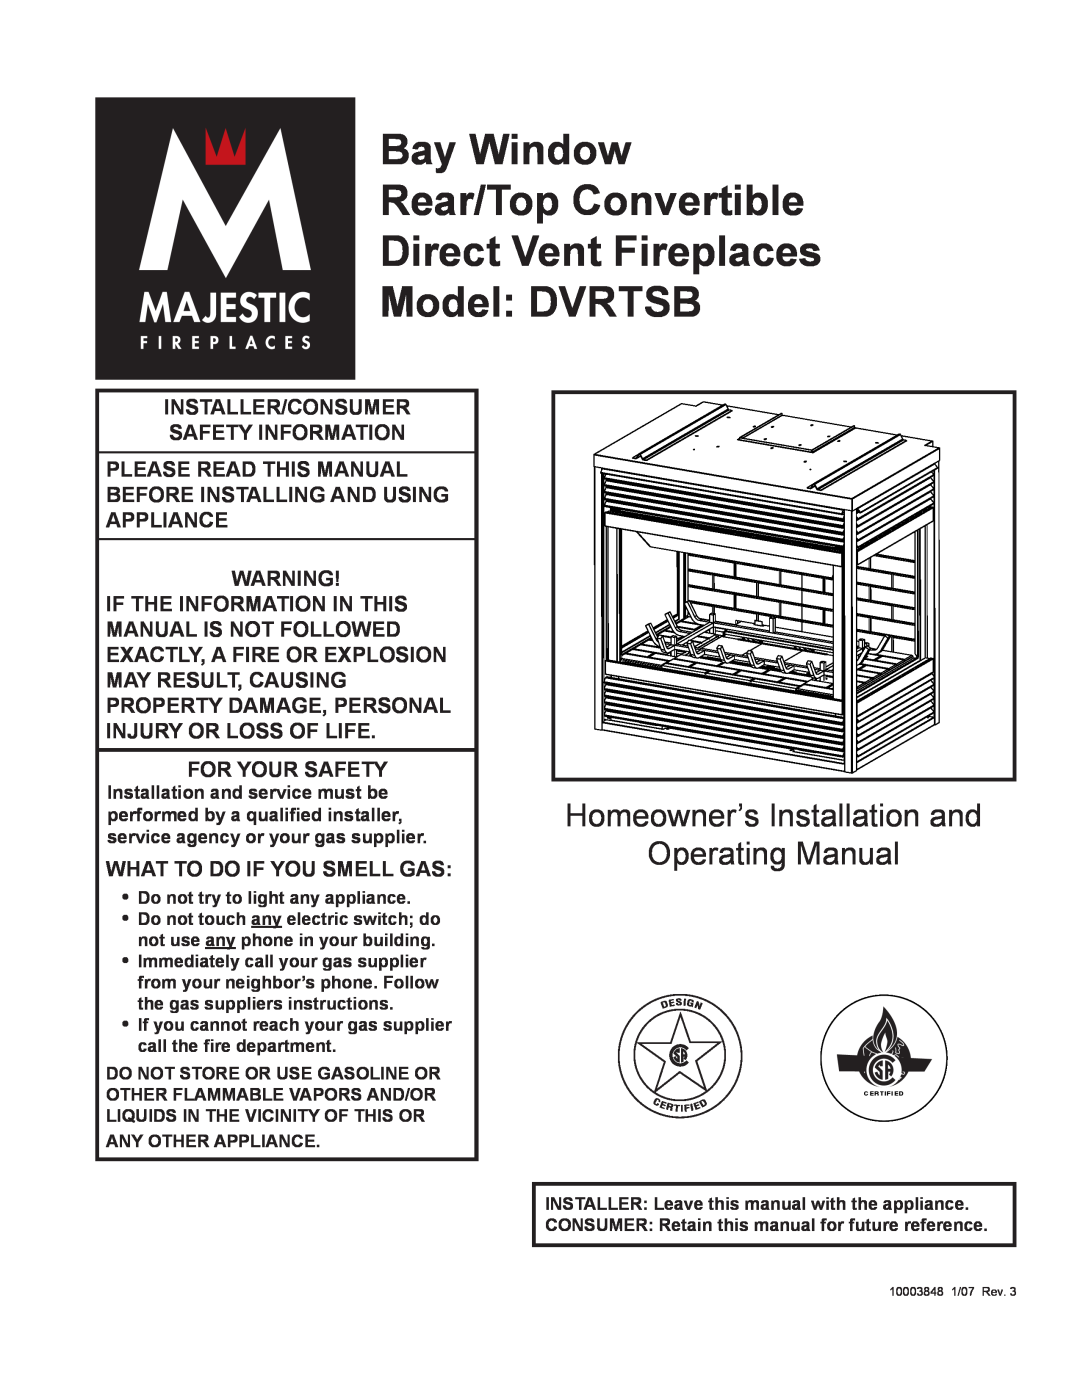 Vermont Casting manual Bay Window Rear/Top Convertible, Direct Vent Fireplaces Model DVRTSB, For Your Safety 